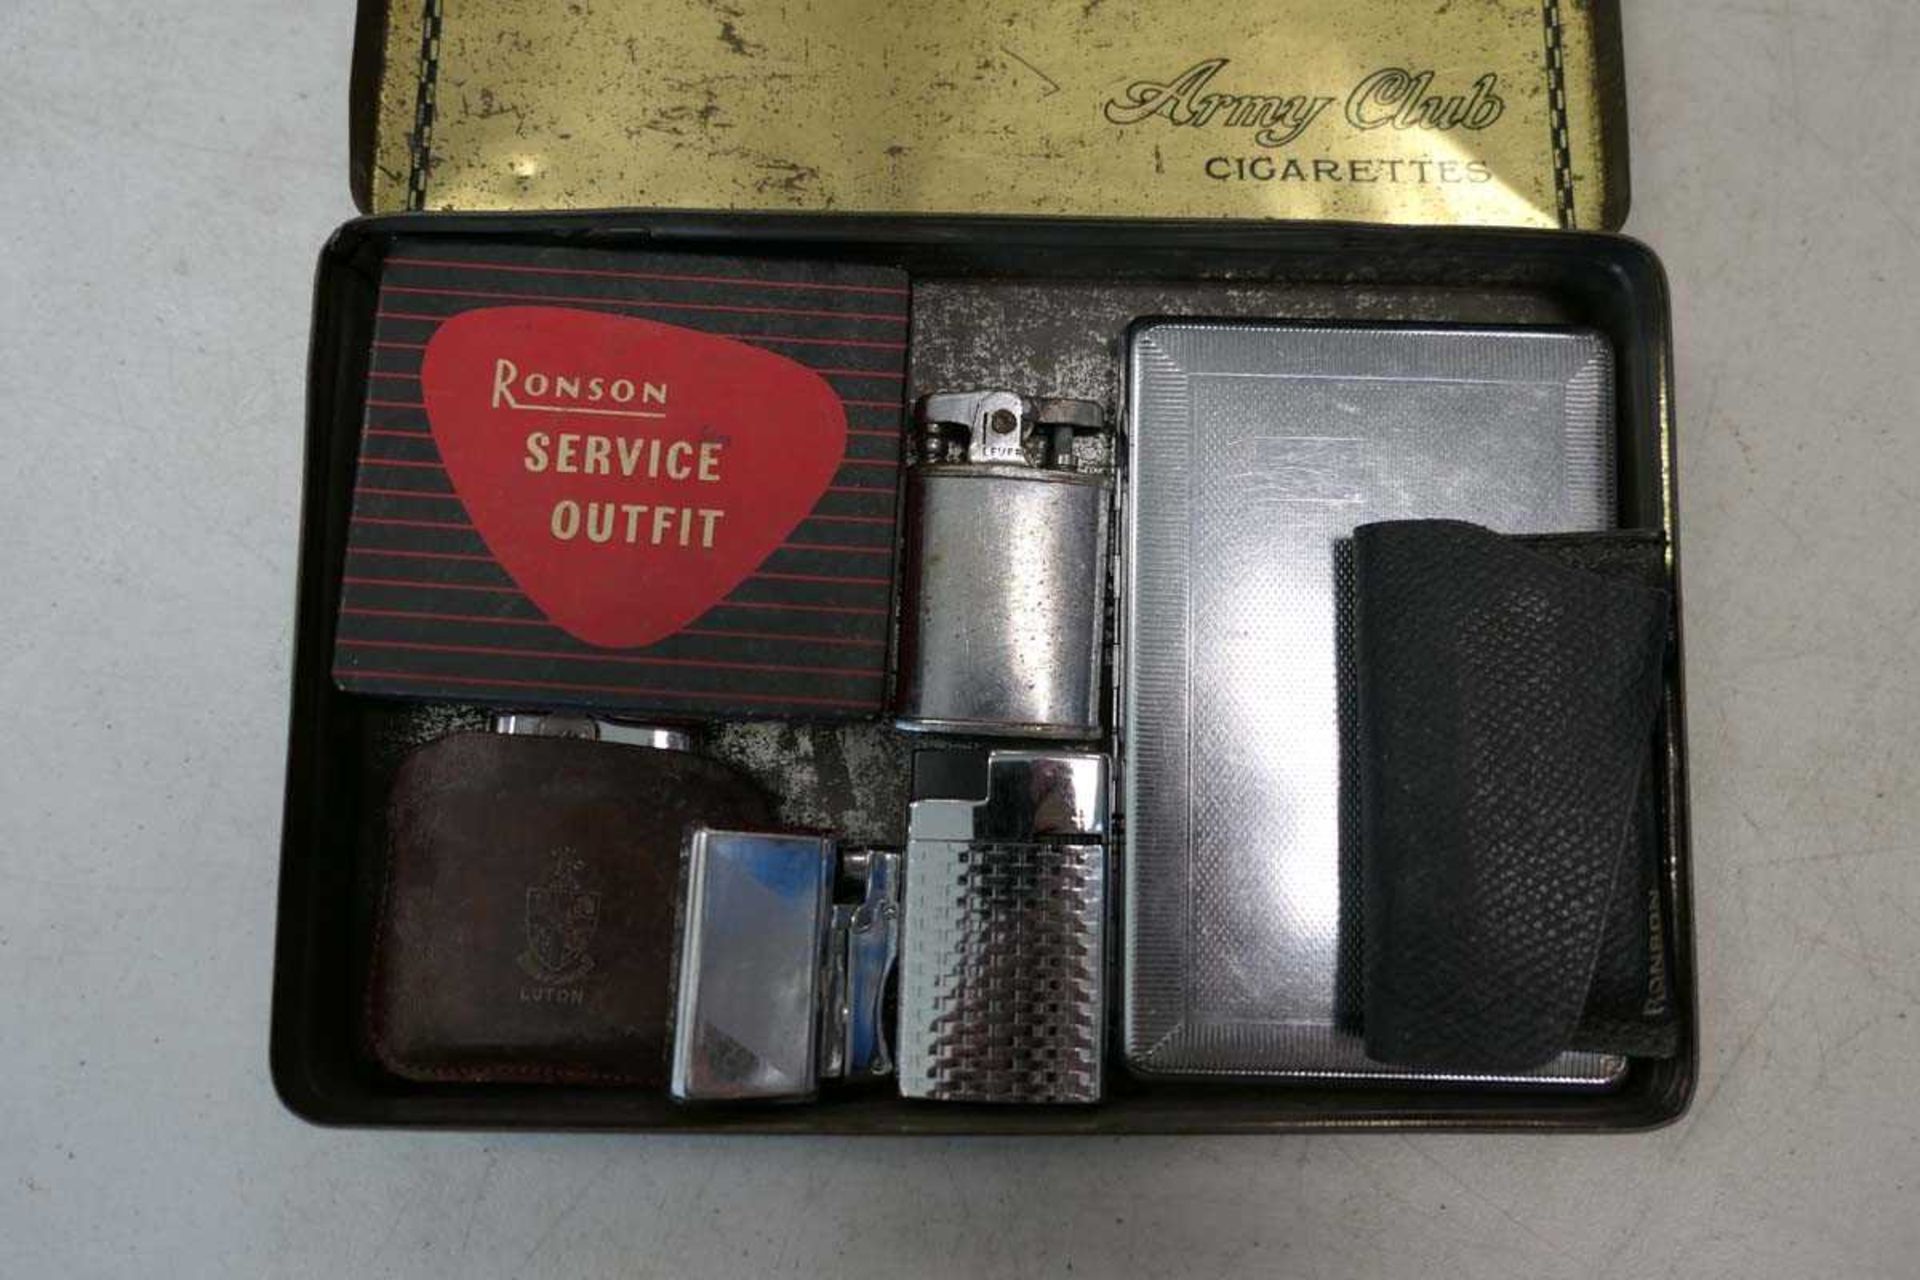 Army Club cigarettes tin containing various lighters inc. Ronson